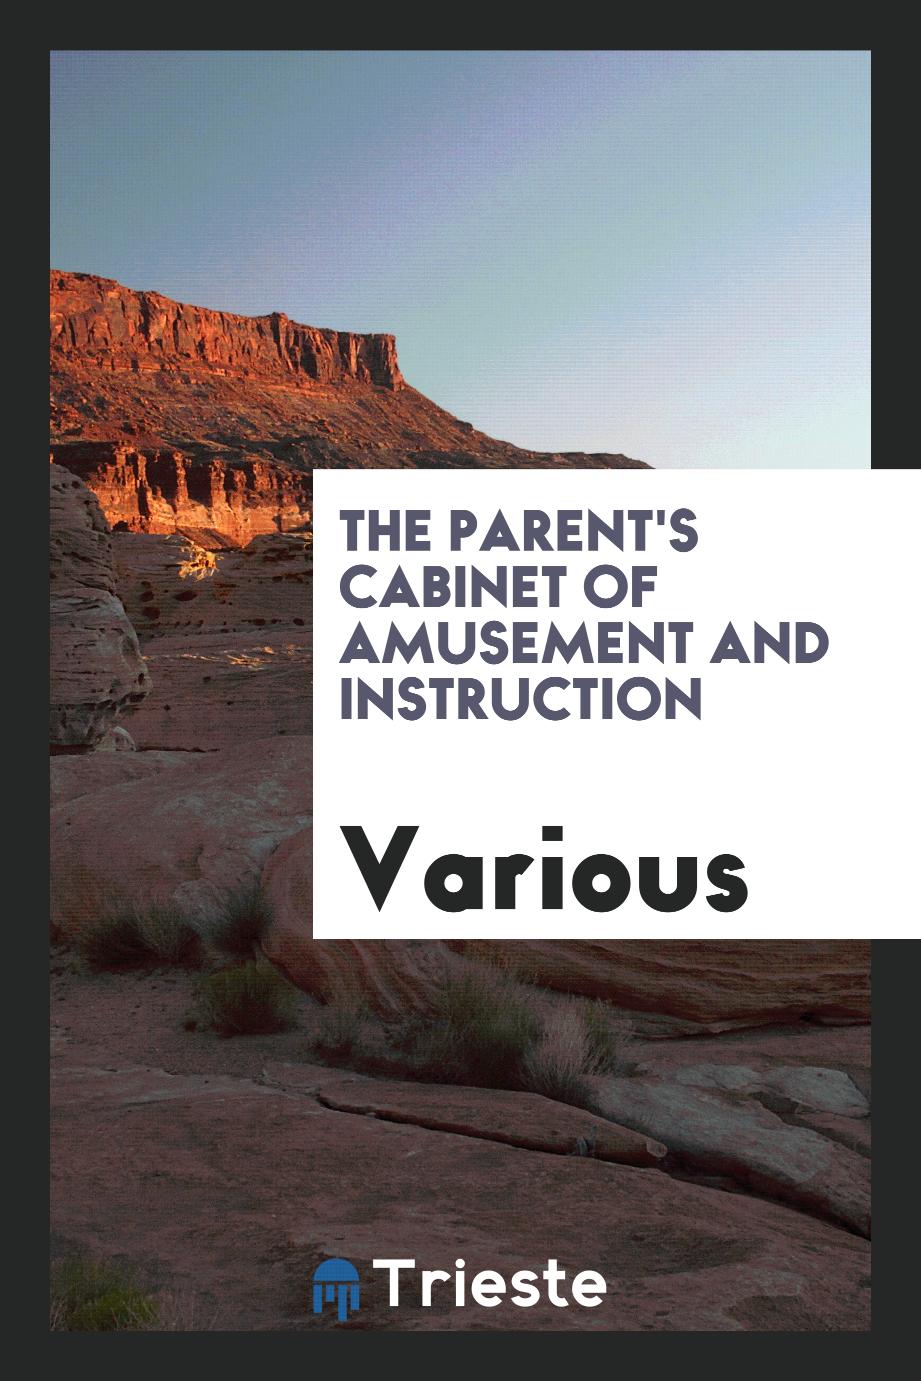 The Parent's Cabinet of Amusement and Instruction